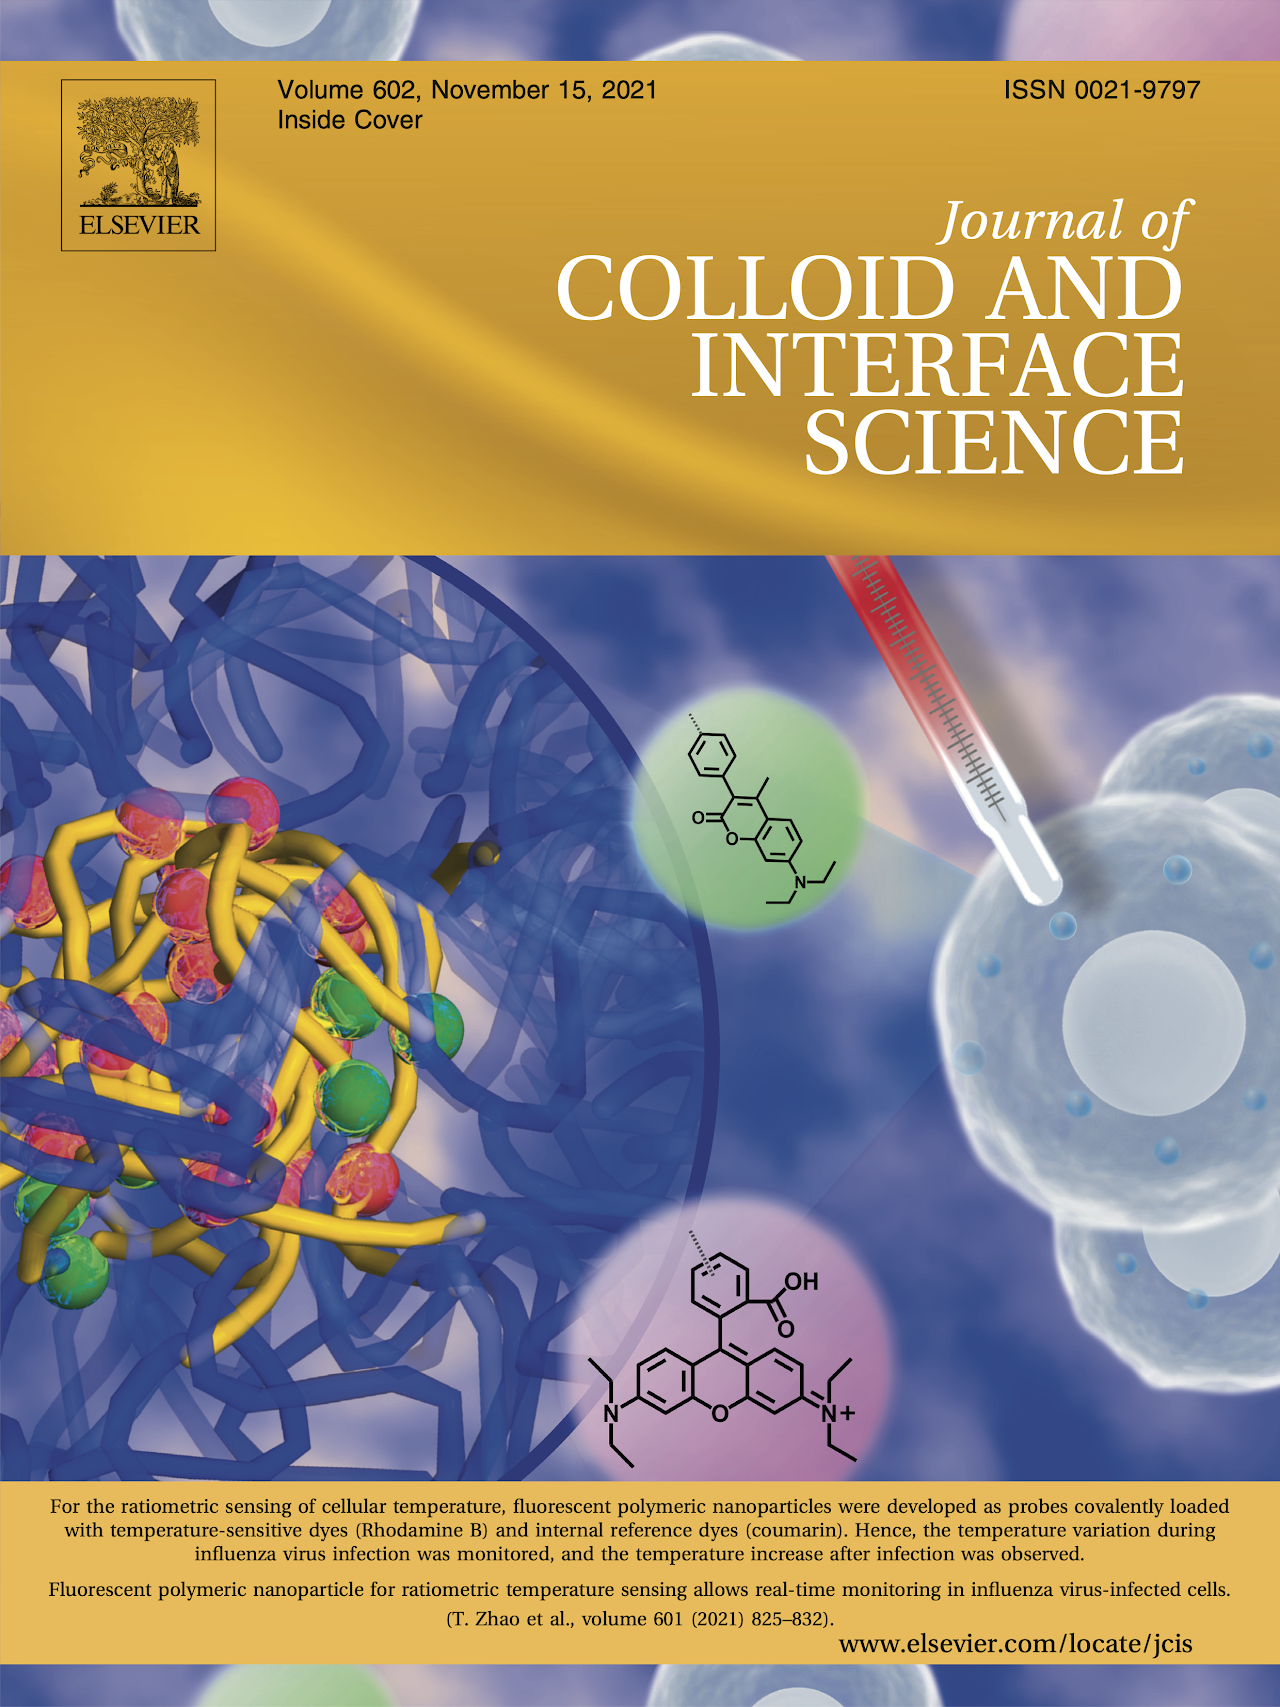 Journal of Colloid Surface & Interface Science